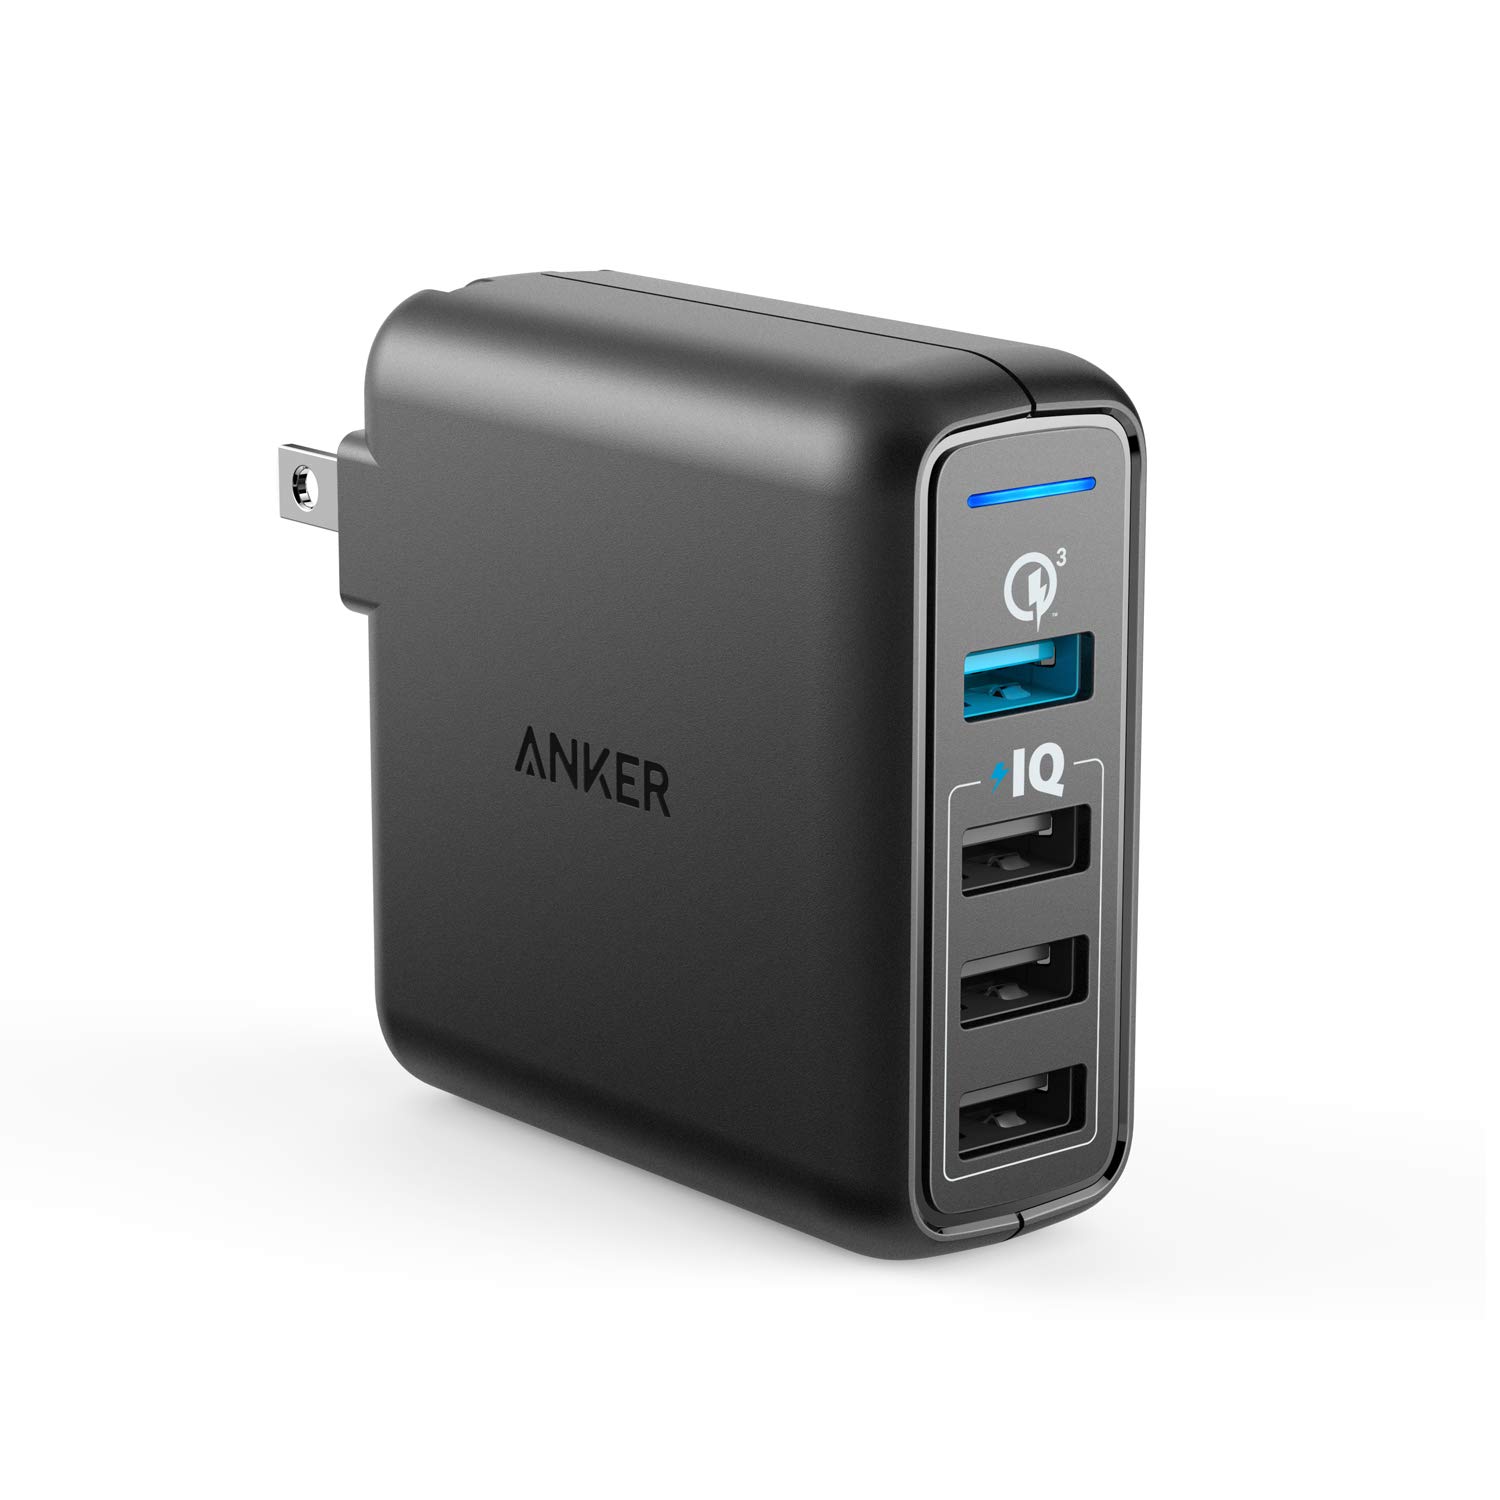 Book Cover Anker Quick Charge 3.0 43.5W 4-Port USB Wall Charger, PowerPort Speed 4 for Galaxy S7/S6/edge/edge+, Note 4/5, LG G4/G5, HTC One M8/M9/A9, Nexus 6, with PowerIQ for iPhone 7, iPad, and More